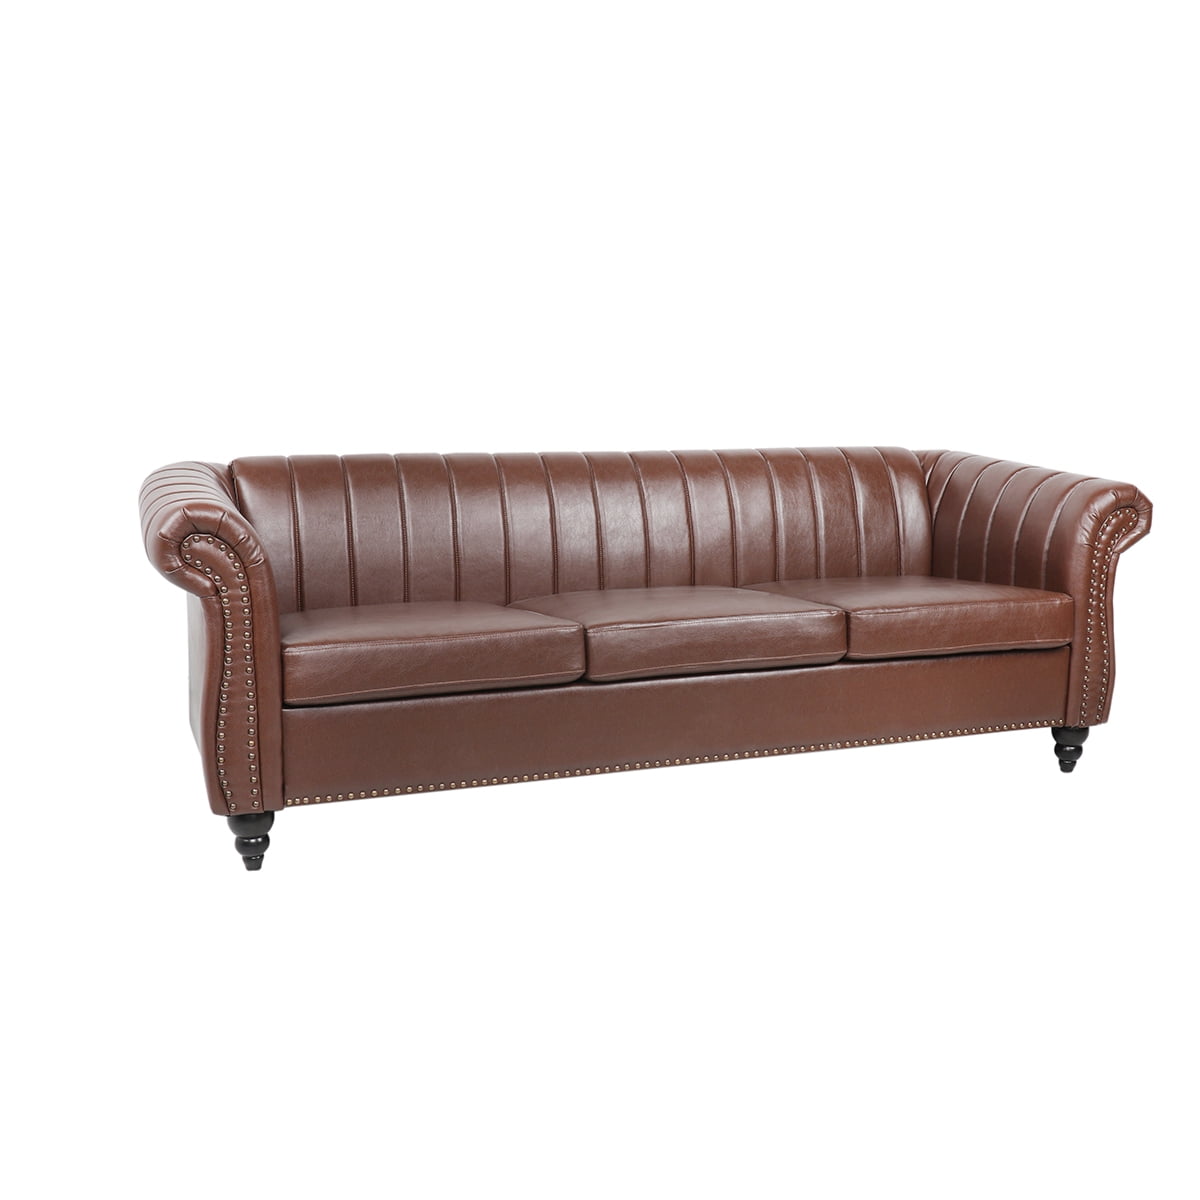 Veryke 84'' Chesterfield Faux Leather Sofa 3 Seater Couch with Rolled ...